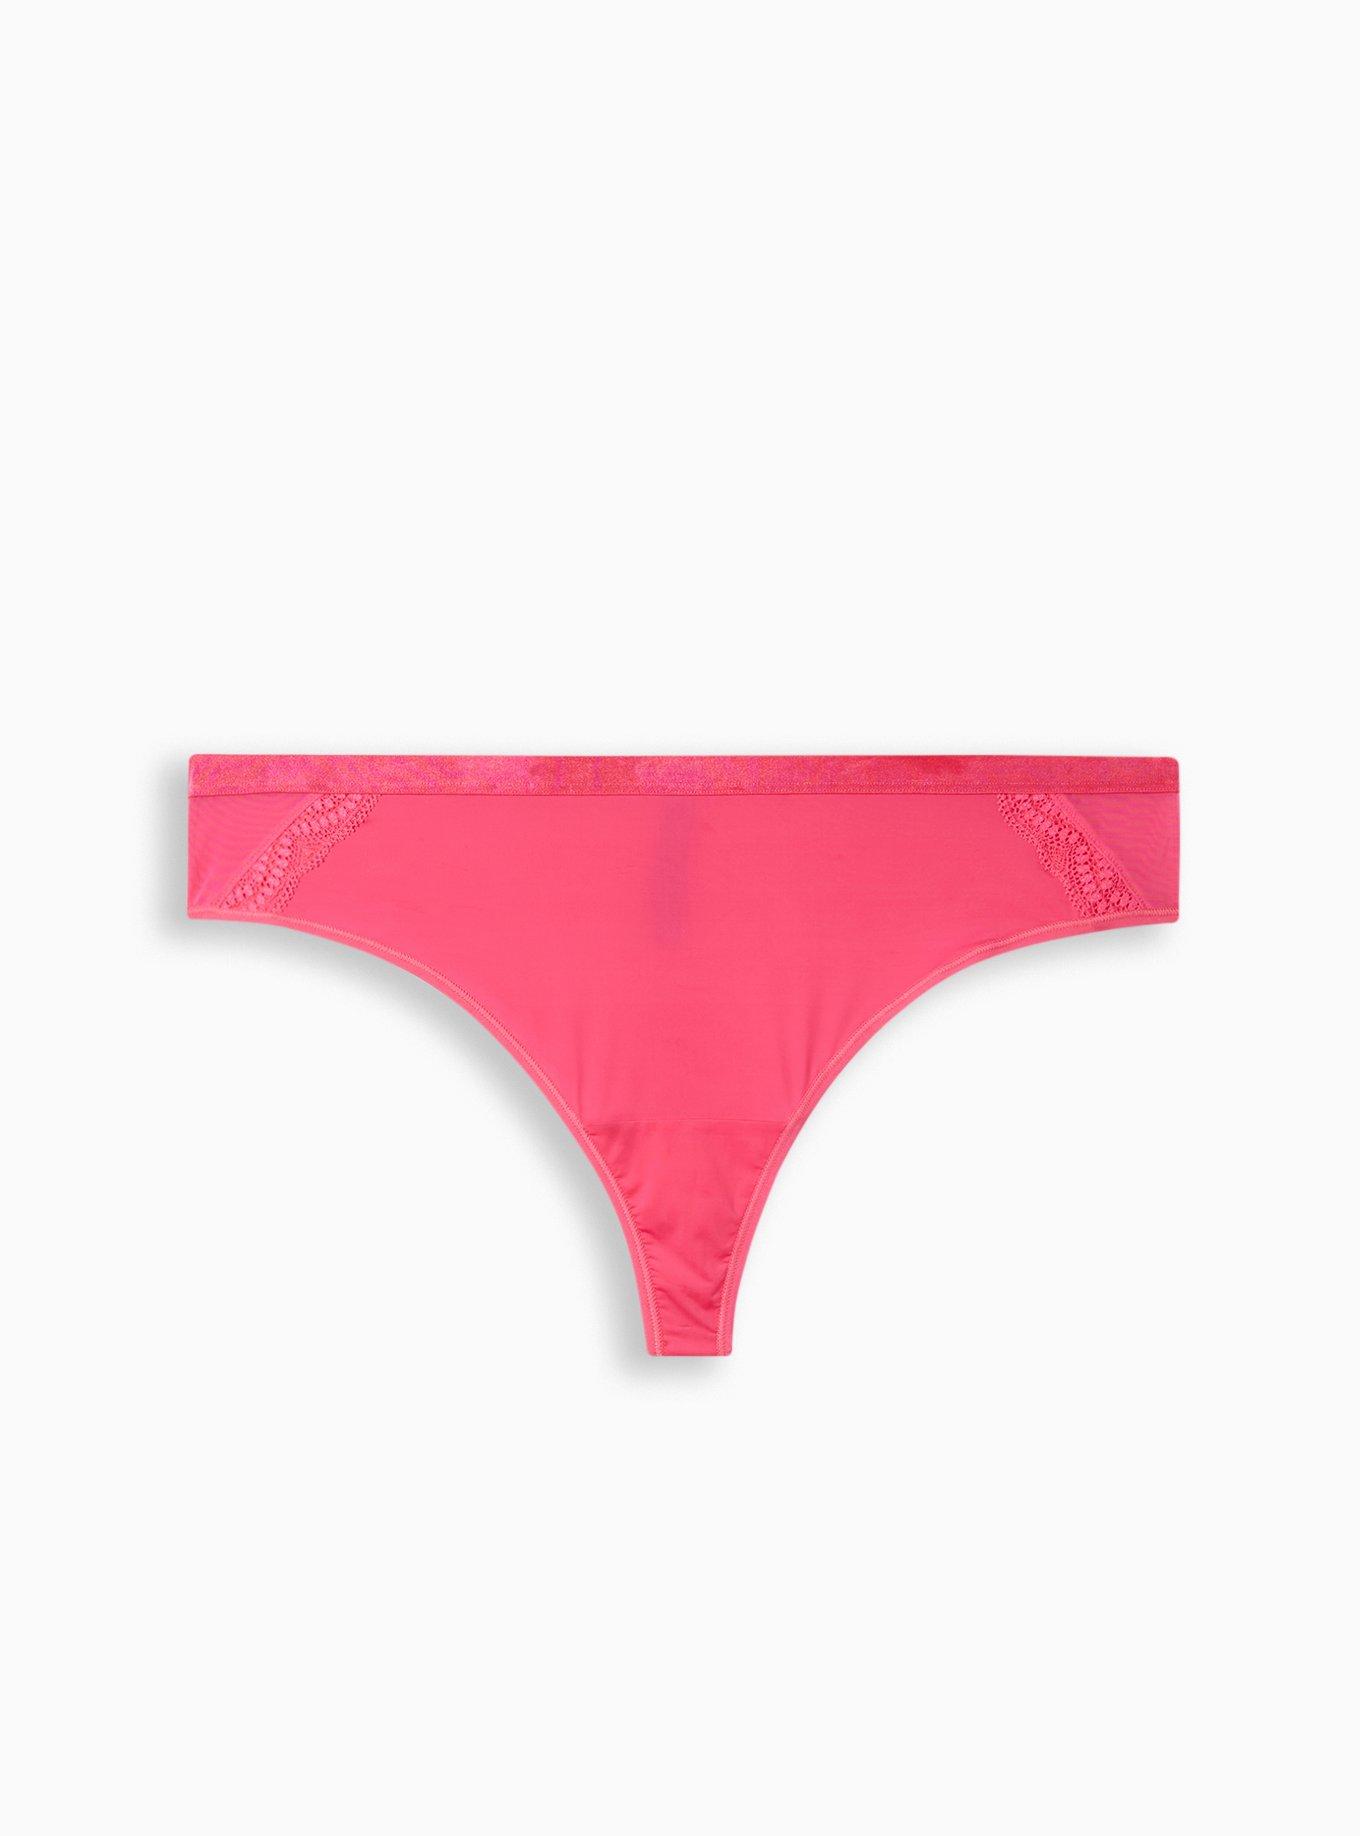 Montana Leather Thong Panty Brief, Something Wicked